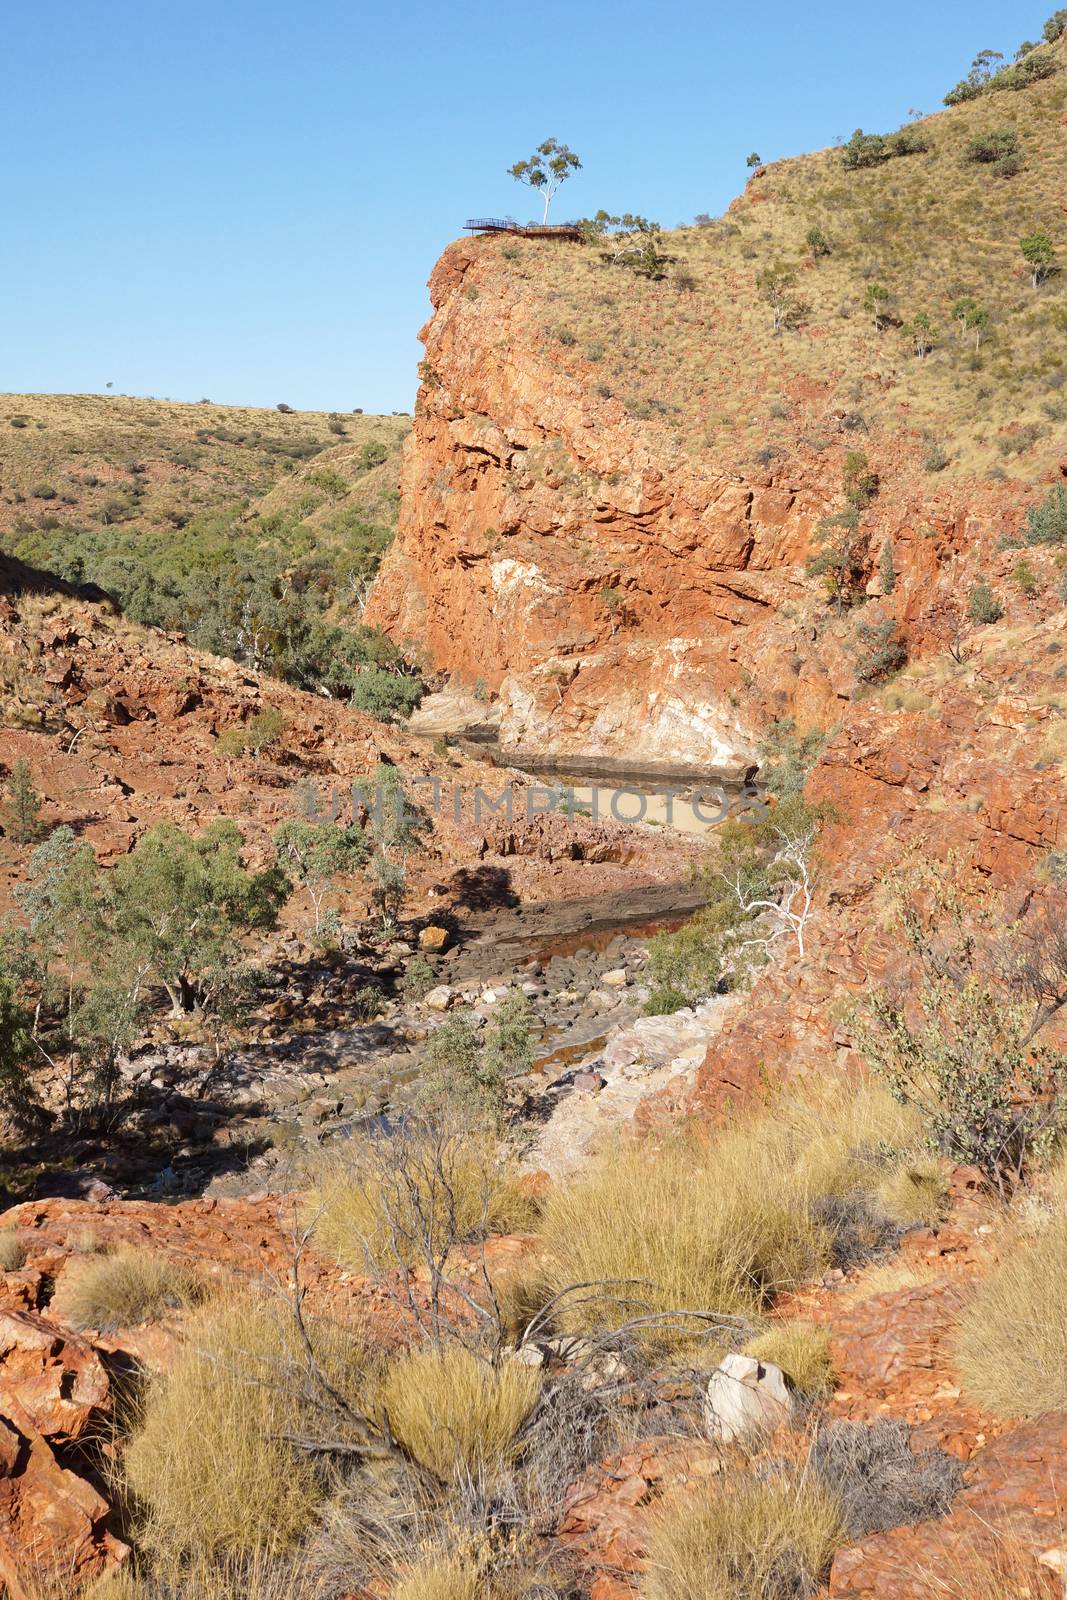 ALICE SPRINGS, AUSTRALIA - Mai 1, 2015: Ormiston Gorge, Landscape of West MacDonnell National Park on May 1, 2015 in Northern Territory, Australia